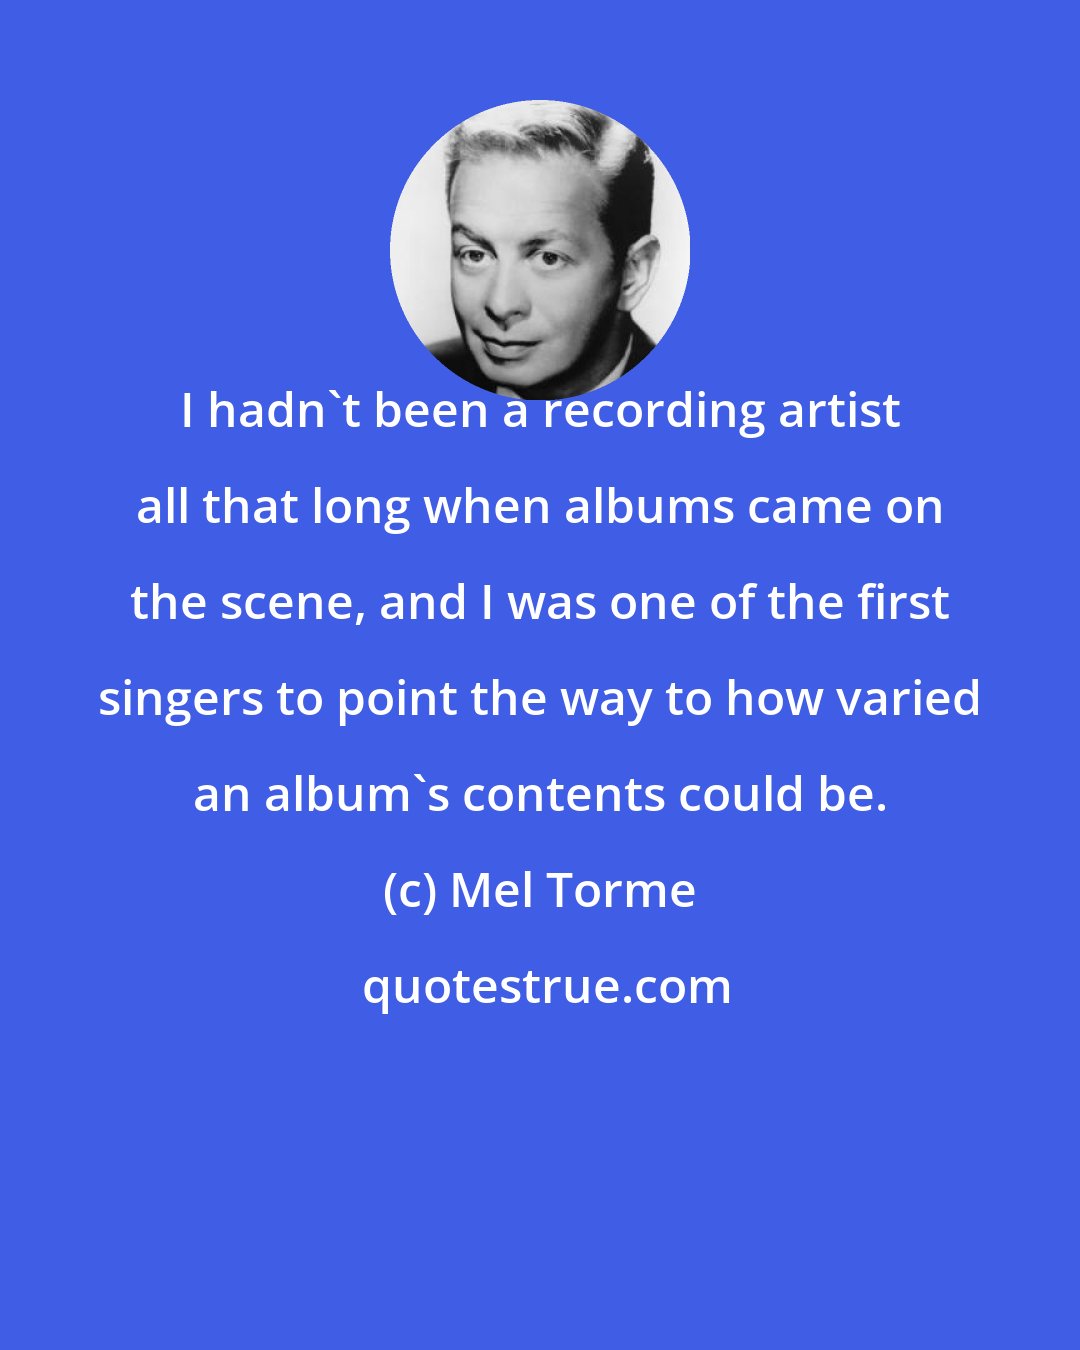 Mel Torme: I hadn't been a recording artist all that long when albums came on the scene, and I was one of the first singers to point the way to how varied an album's contents could be.